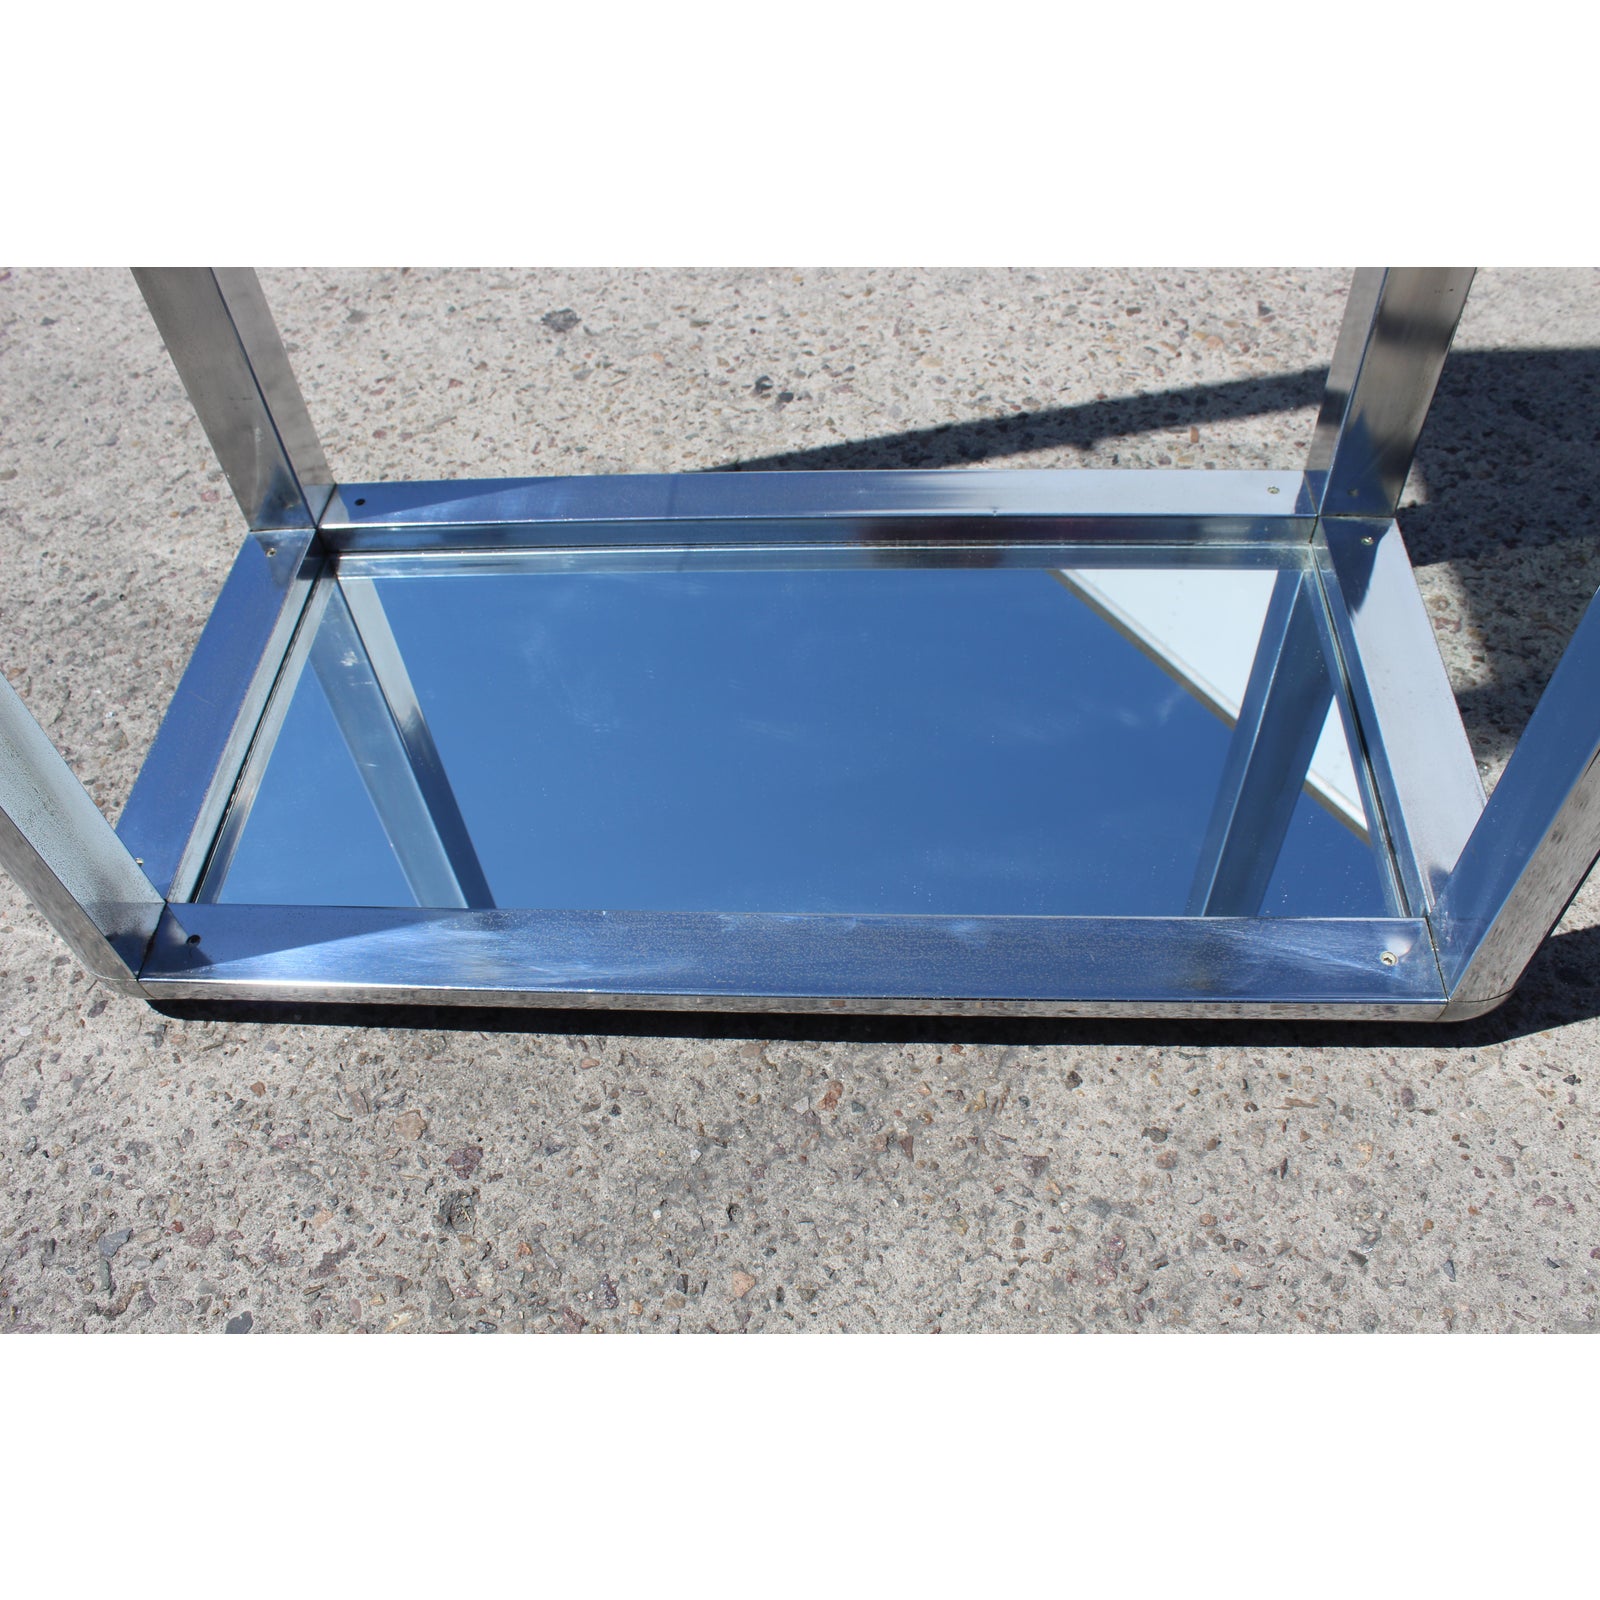 1970s-chrome-mirrored-display-case-stand-8283